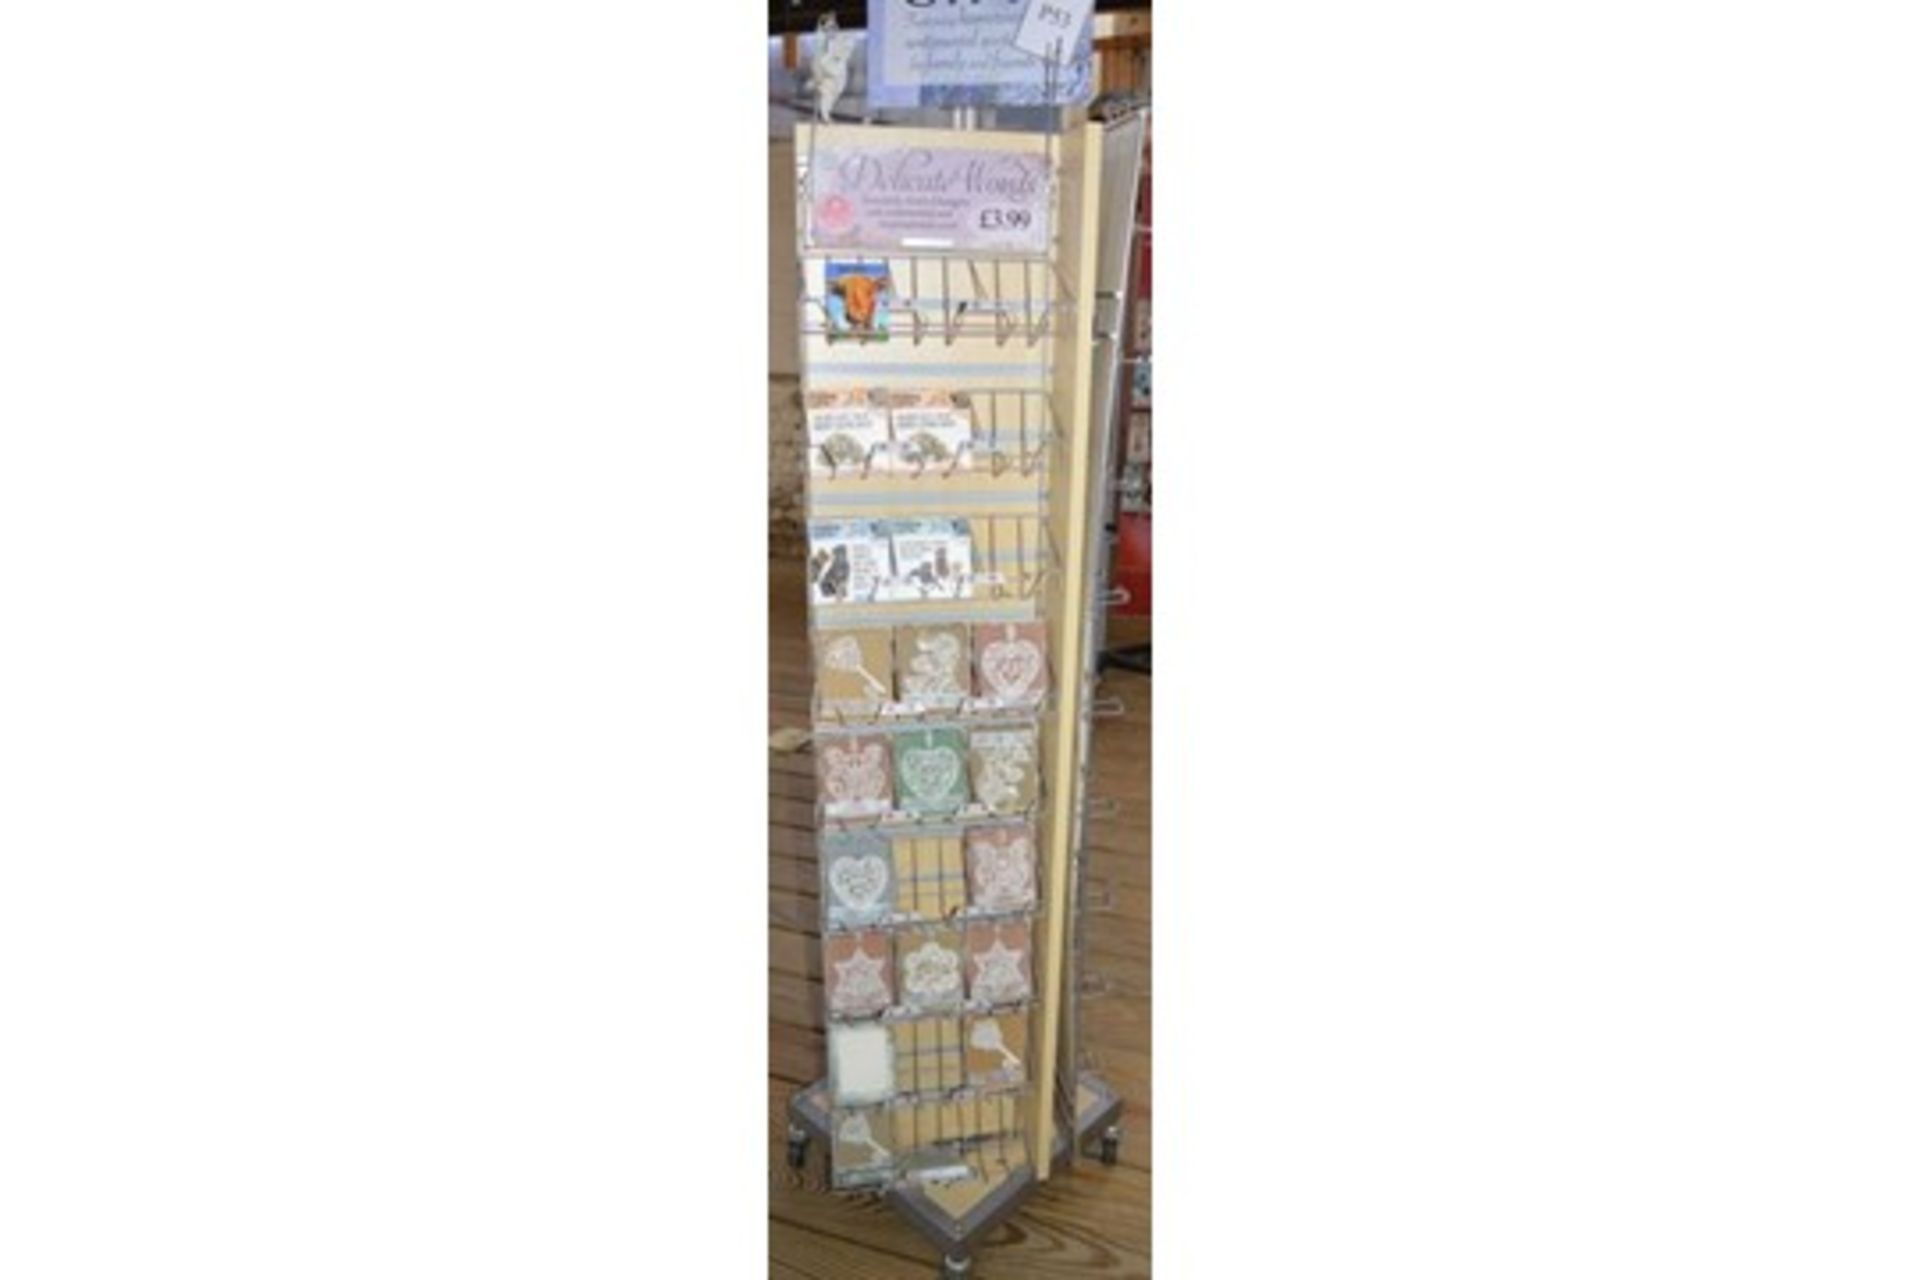 27 x Retail Carousel Display Stands With Approximately 2,800 Items of Resale Stock - Includes - Image 51 of 61